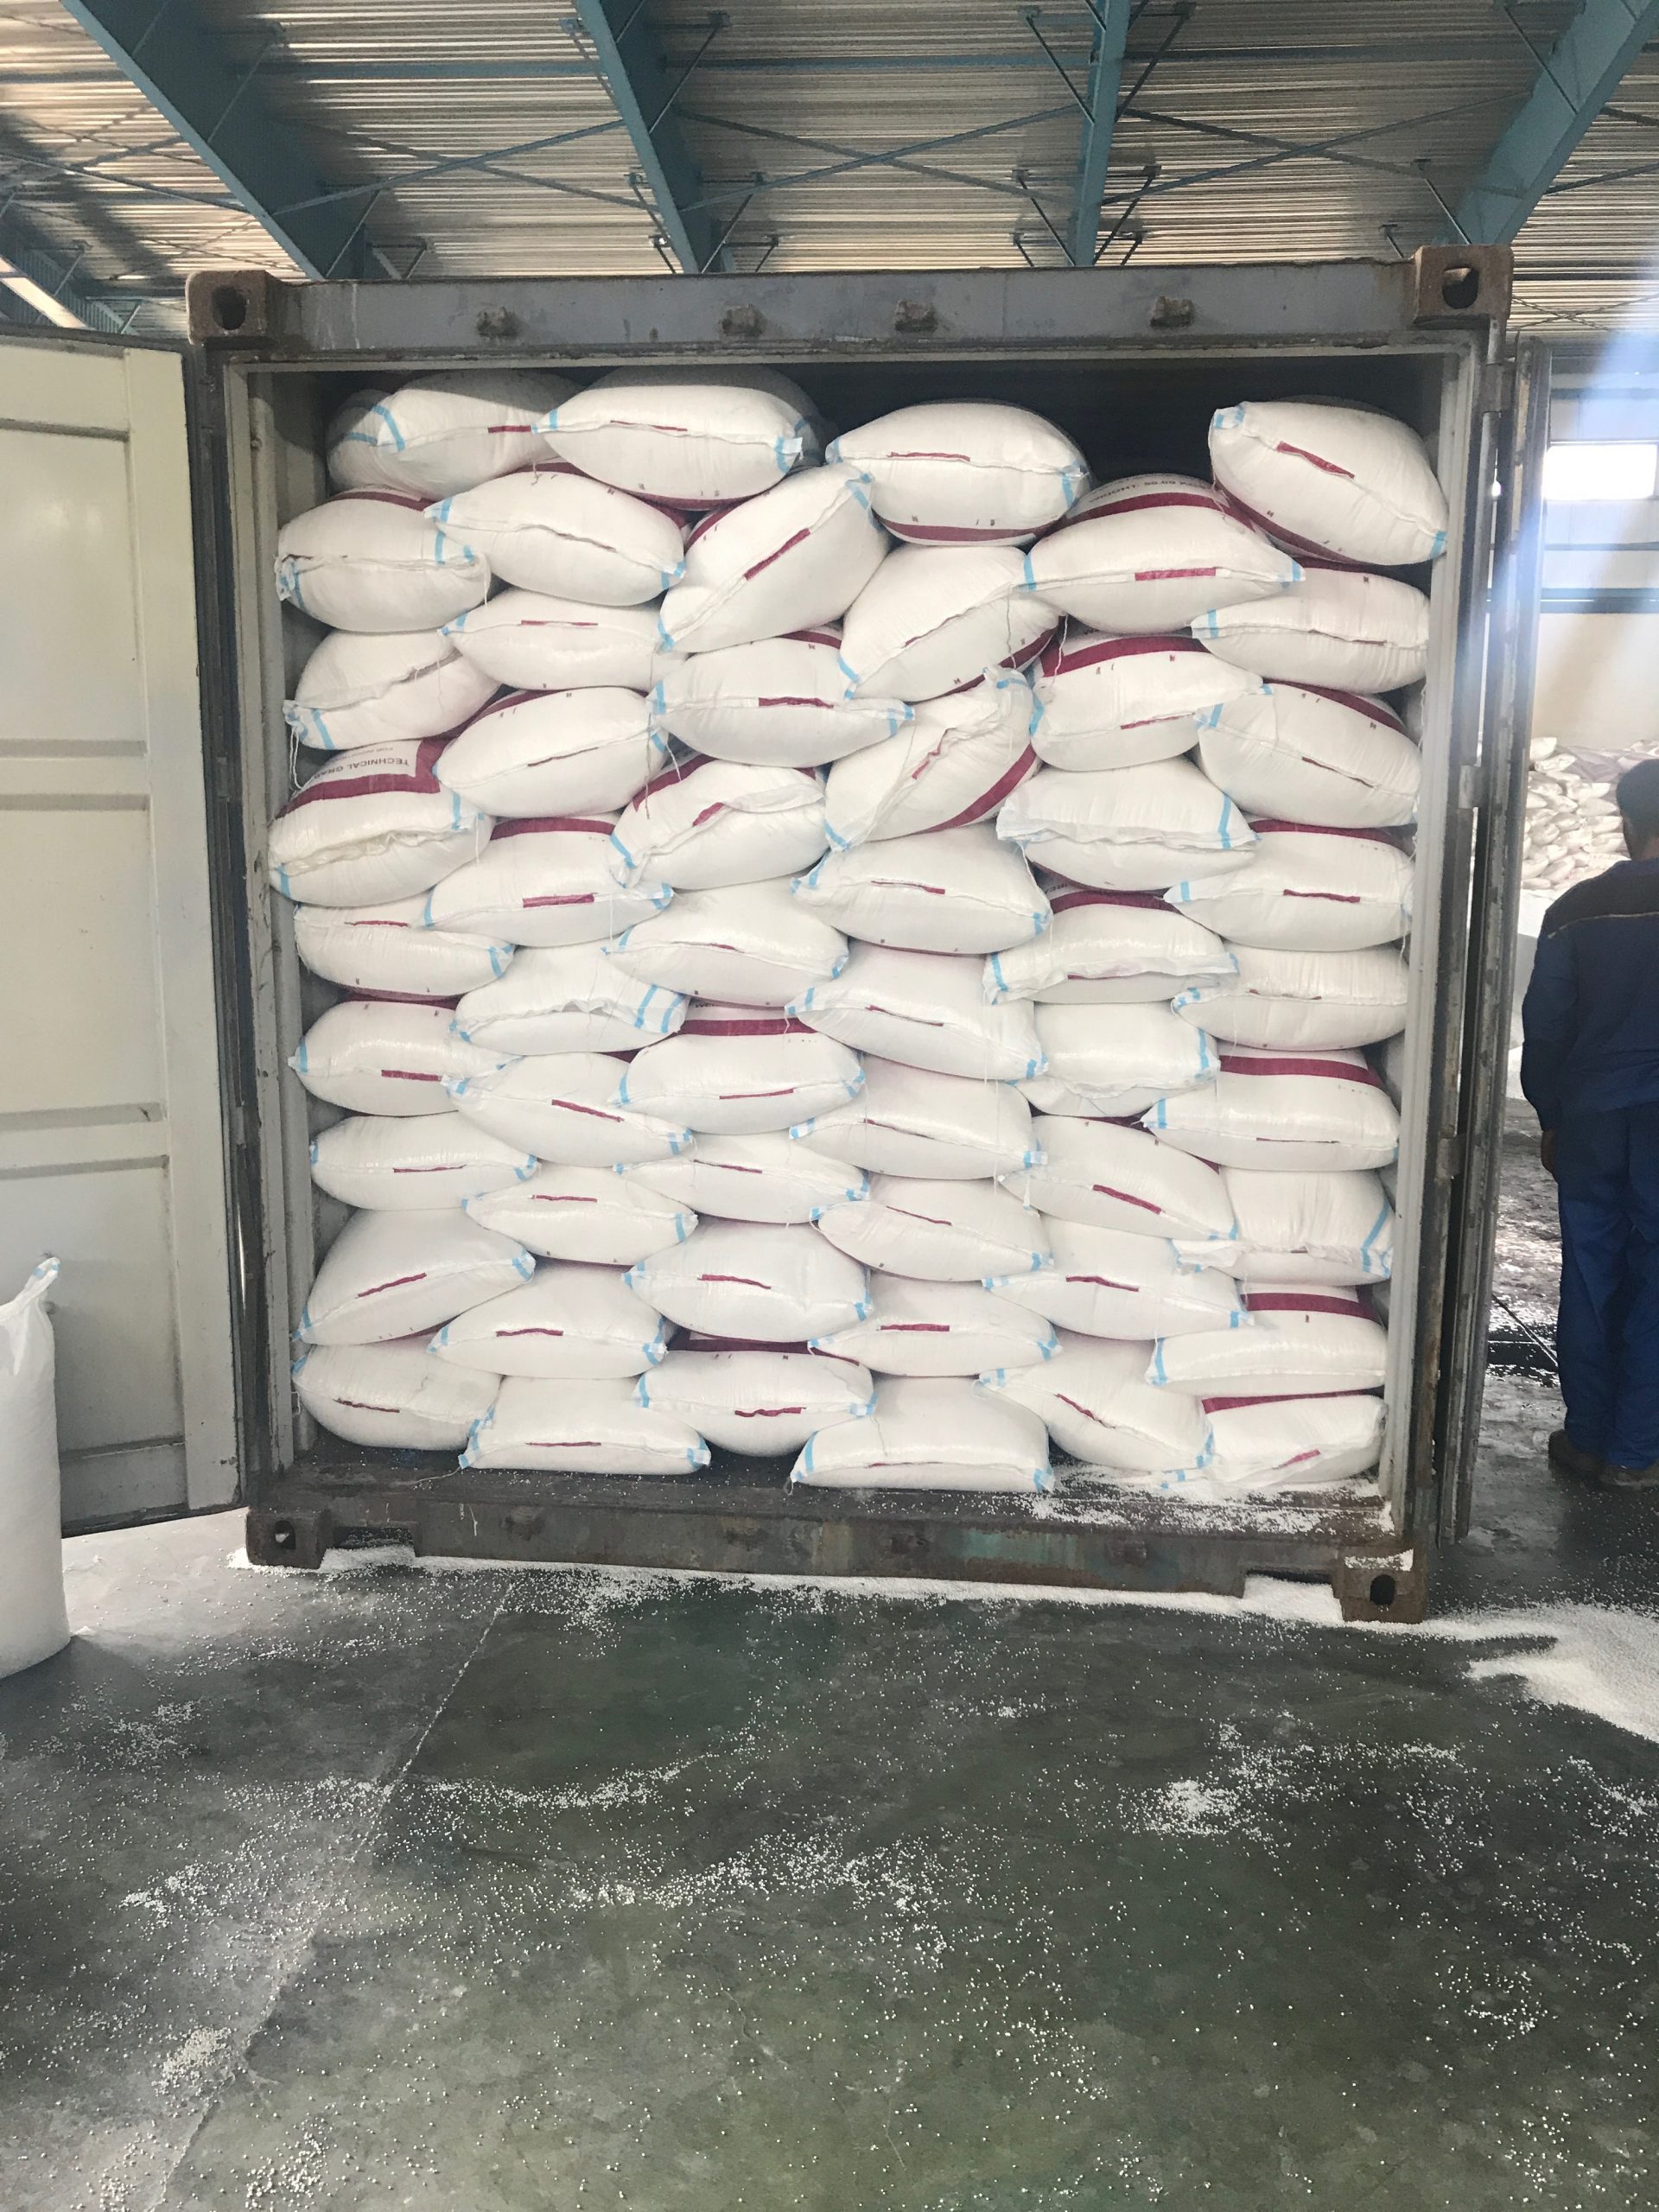 Bags of Urea inside container